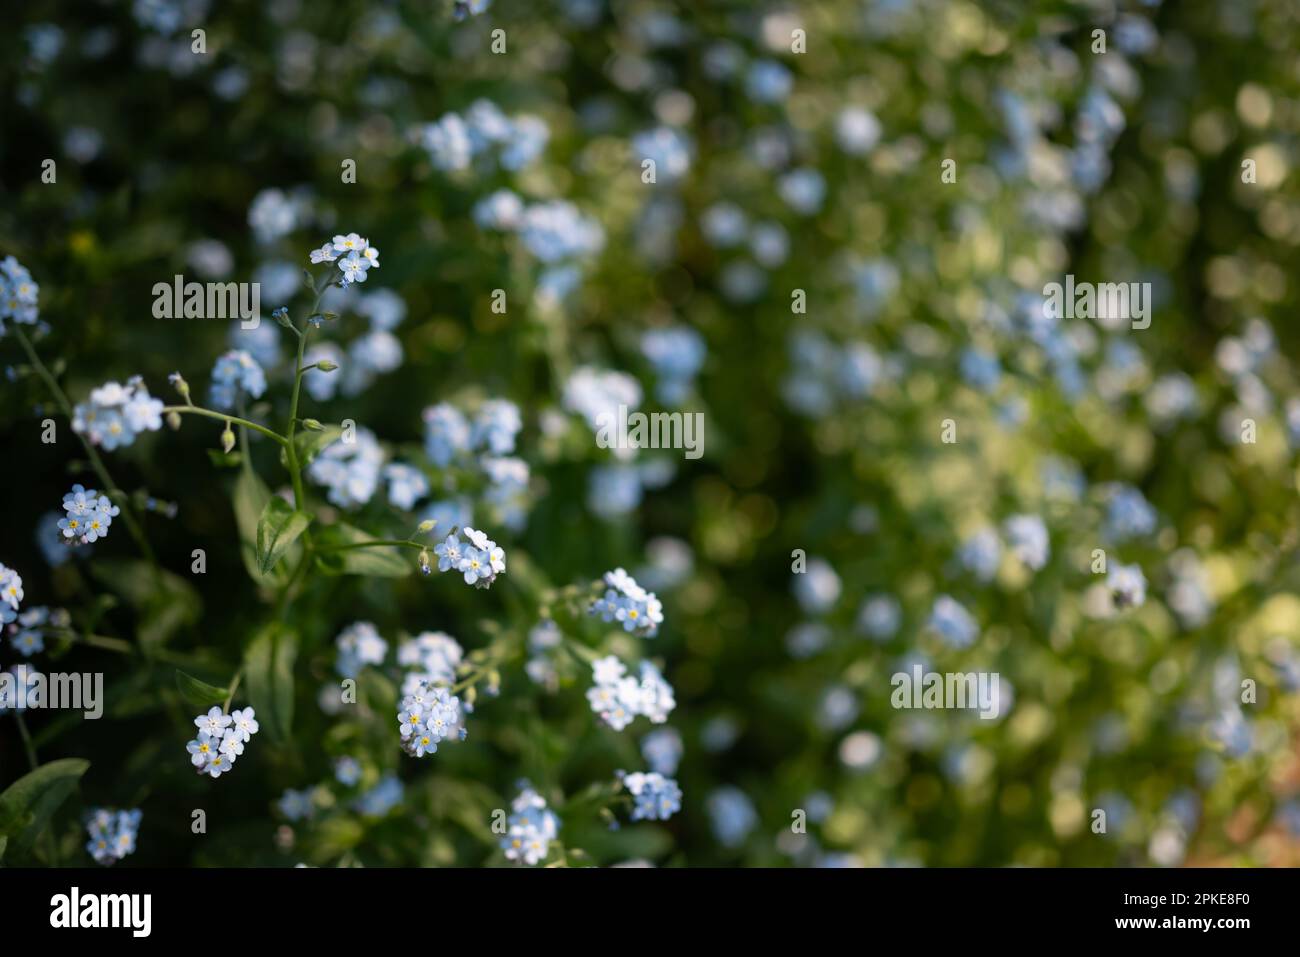 Mostly blurred blue flowers on green leaves background. Wood Forget-me-not Stock Photo